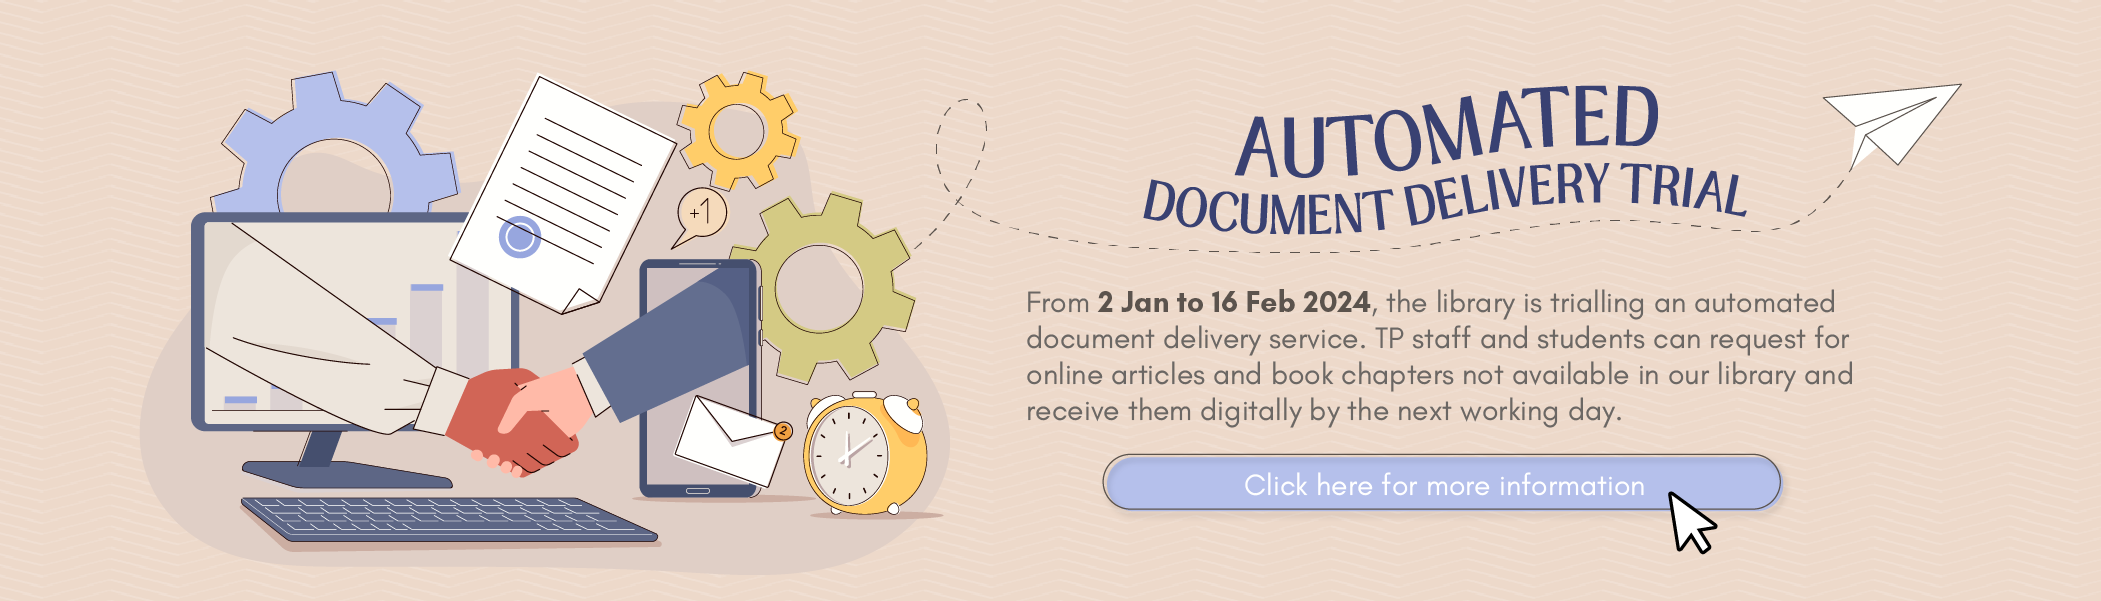 Automated Document Delivery Trial